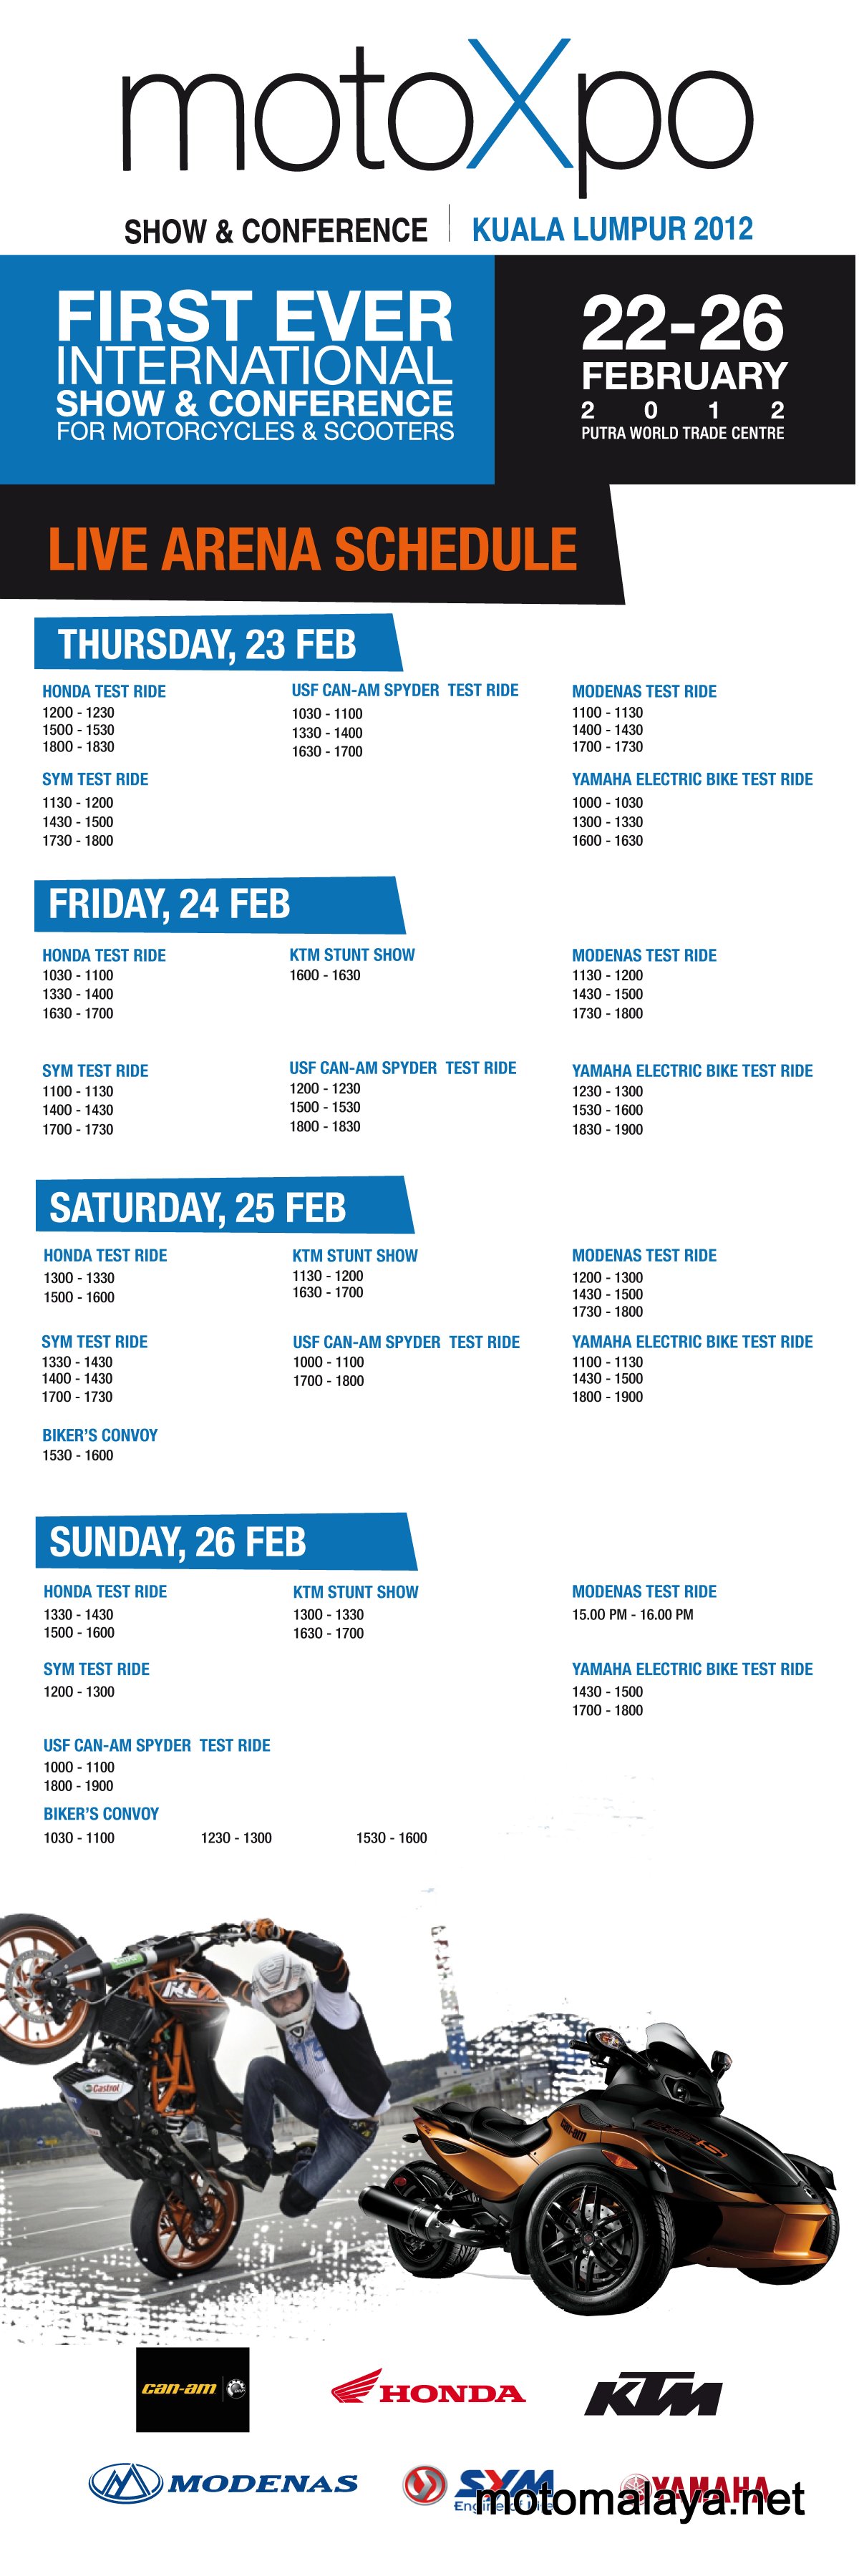 Motoxpo Schedule Bunting Page 2